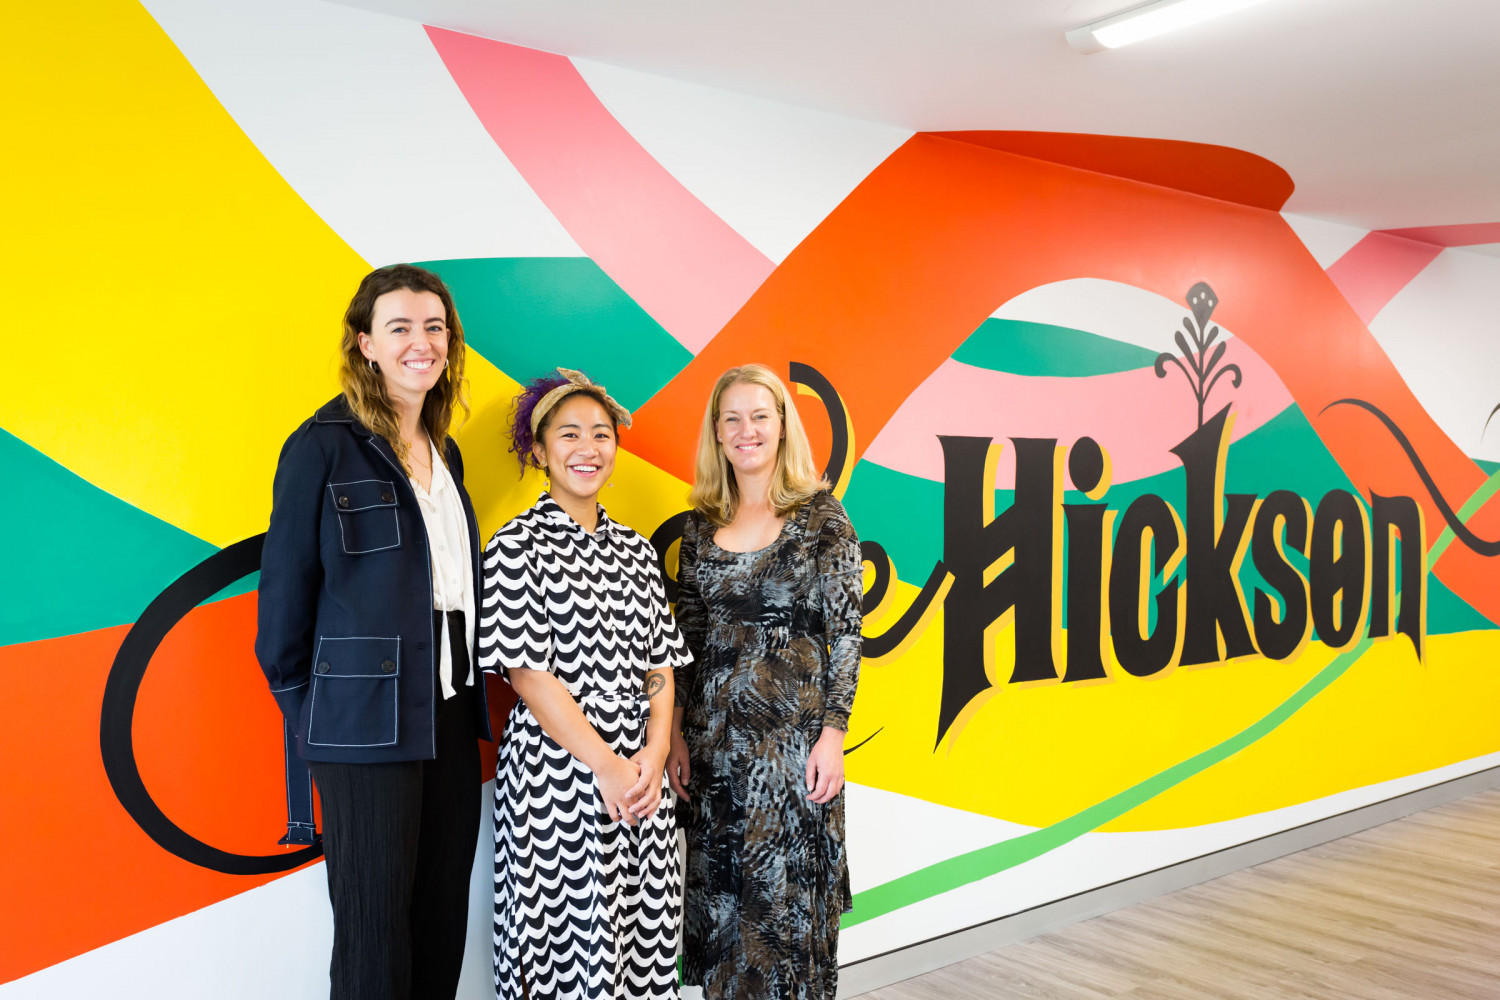 Artist Angelica Catalan with the project team in front of her mural for 'The Hickson', May 2021. Image by Jodie Barker